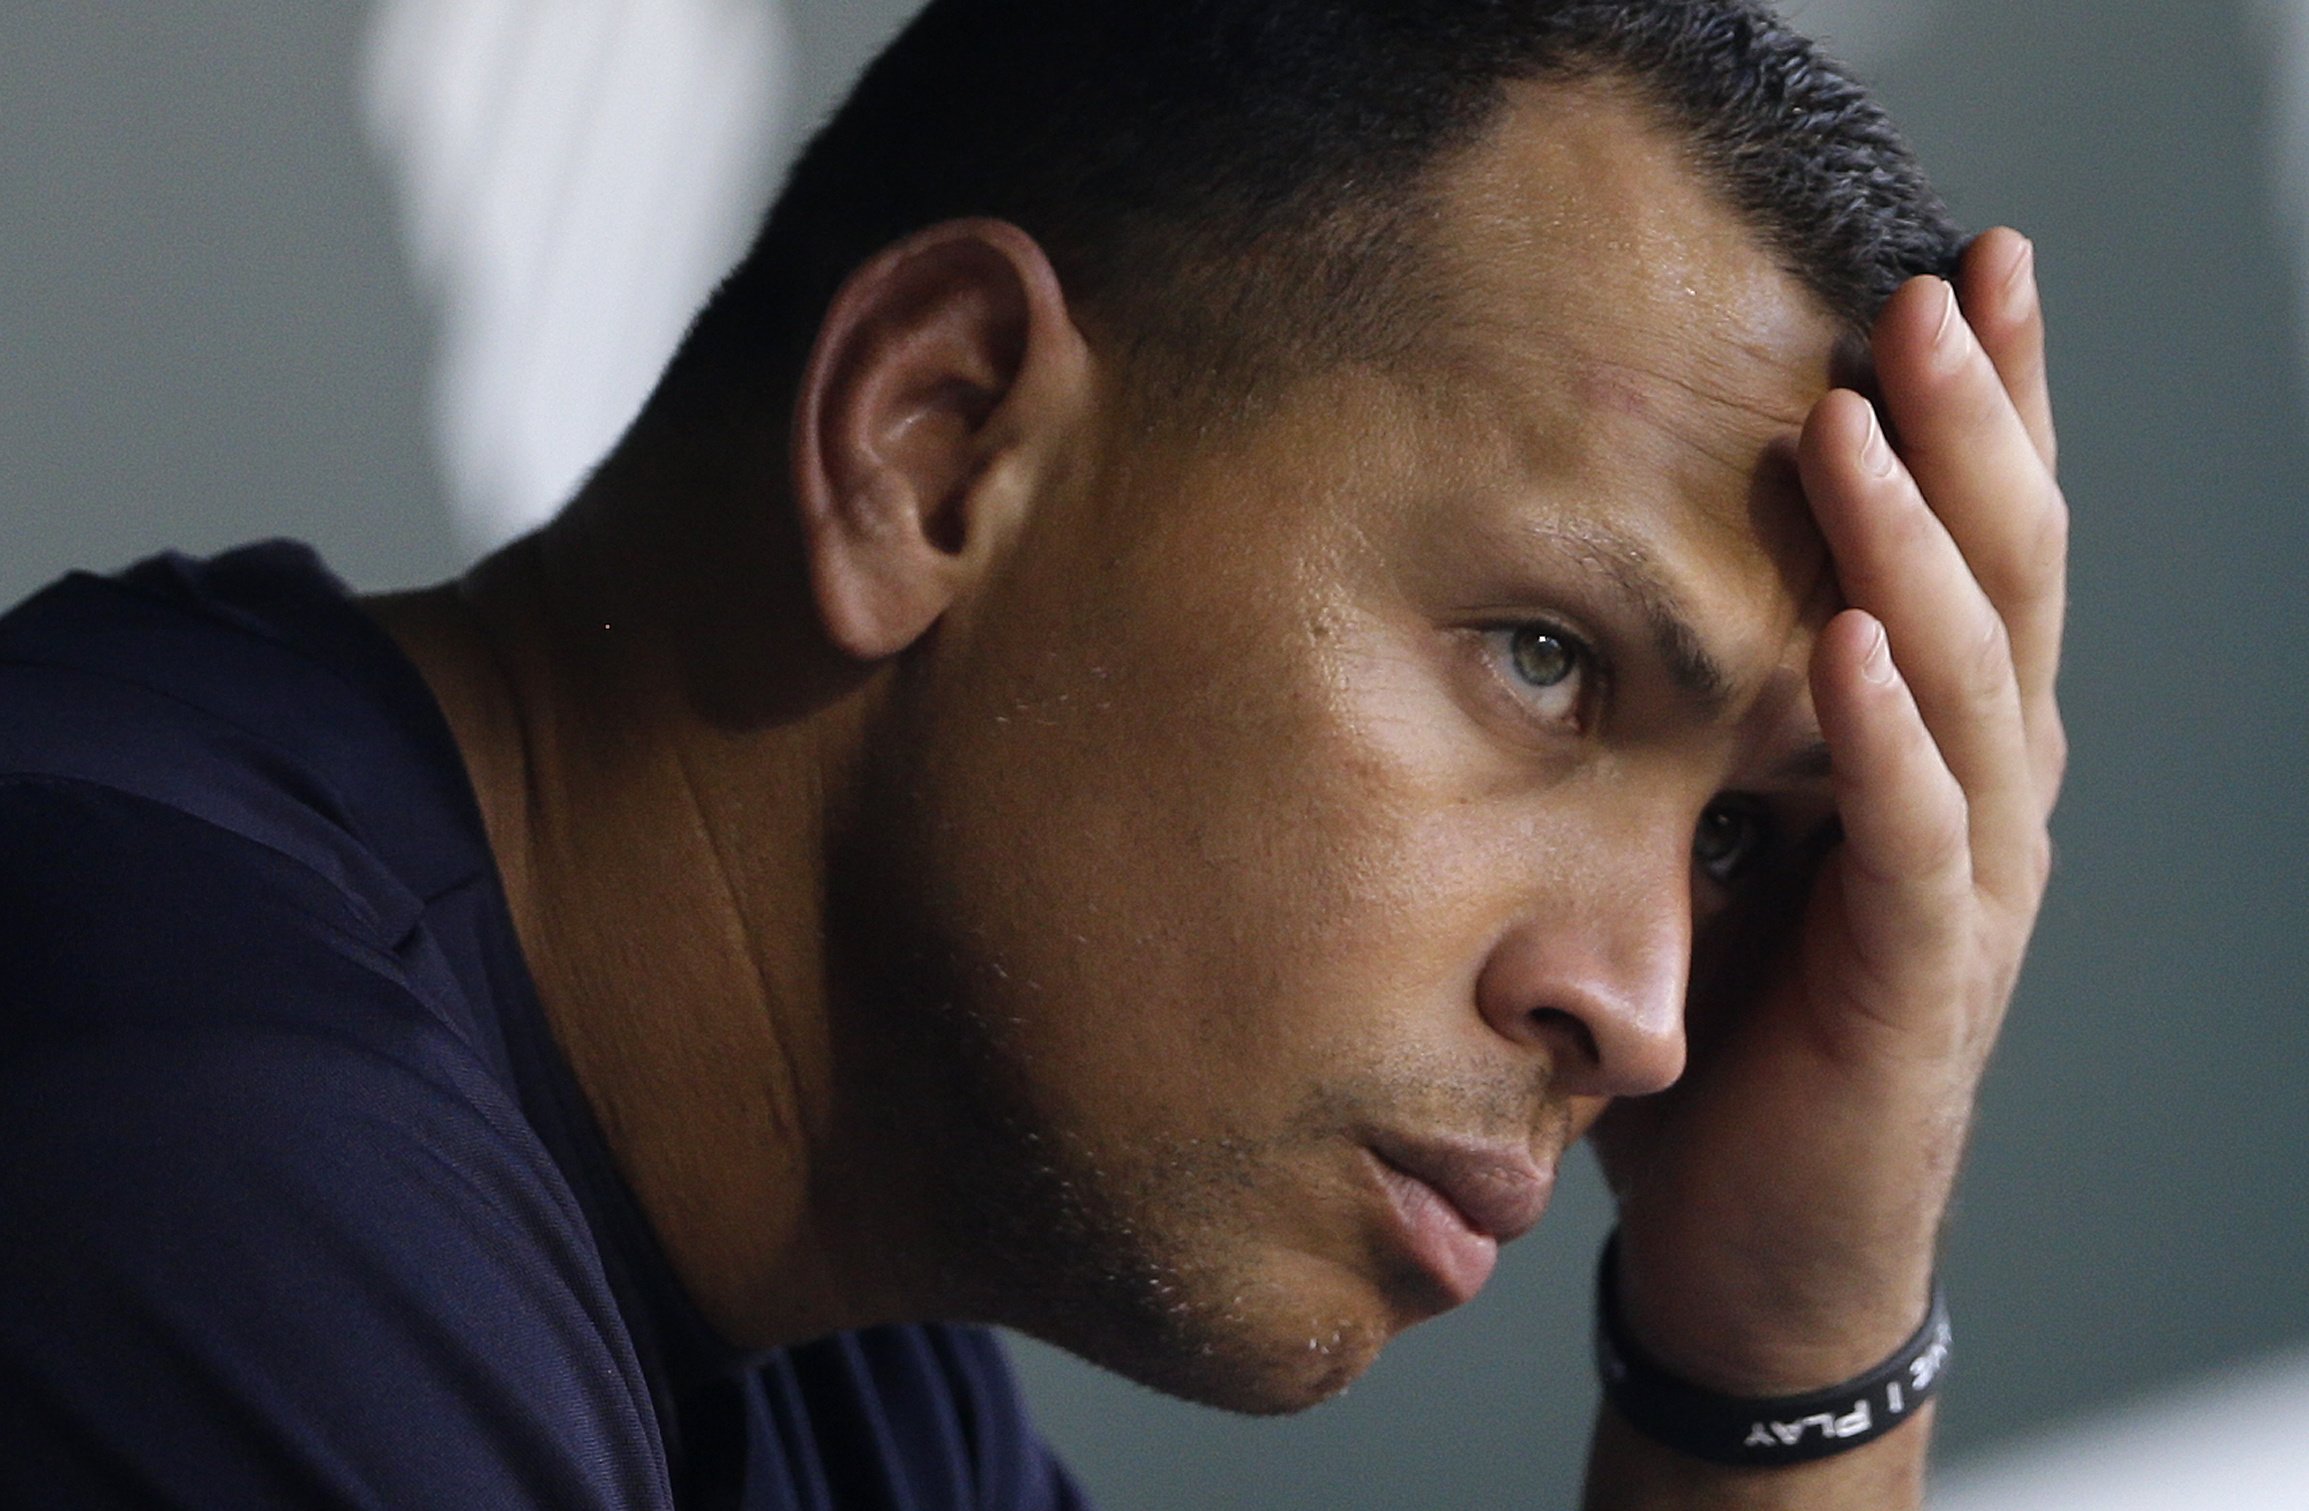 New York Yankees' Alex Rodriguez wipes sweat from his brow as he sits in the dugout before a baseball game against the Baltimore Orioles in Baltimore on Sept. 11, 2013. (Patrick Semansky&amp;mdash;AP)